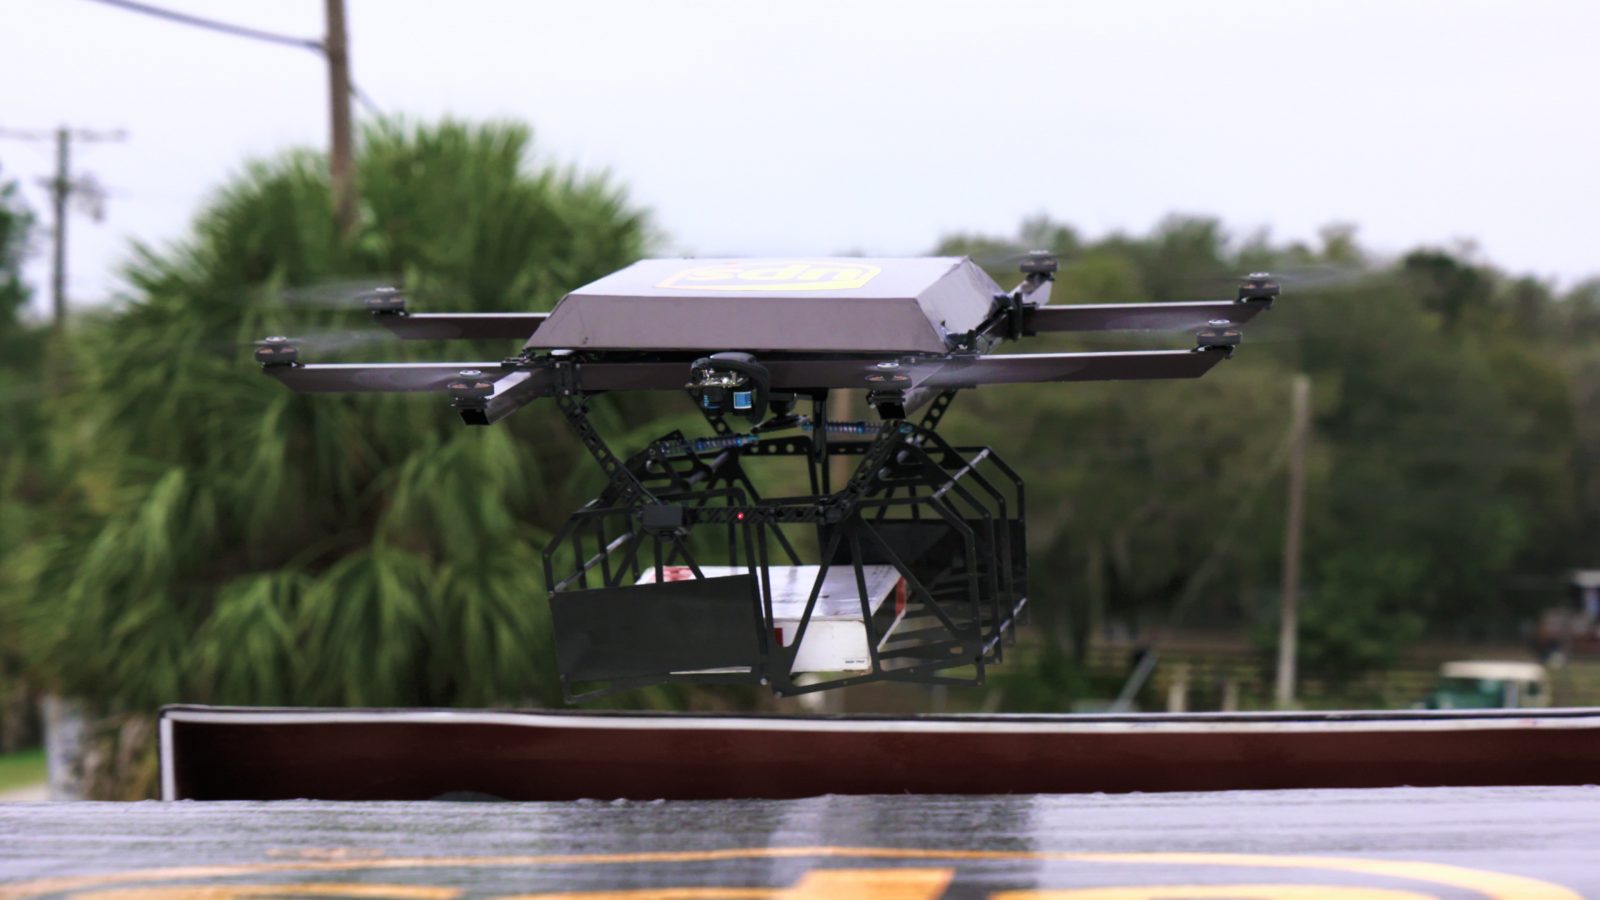 Ups considers using drones in the future